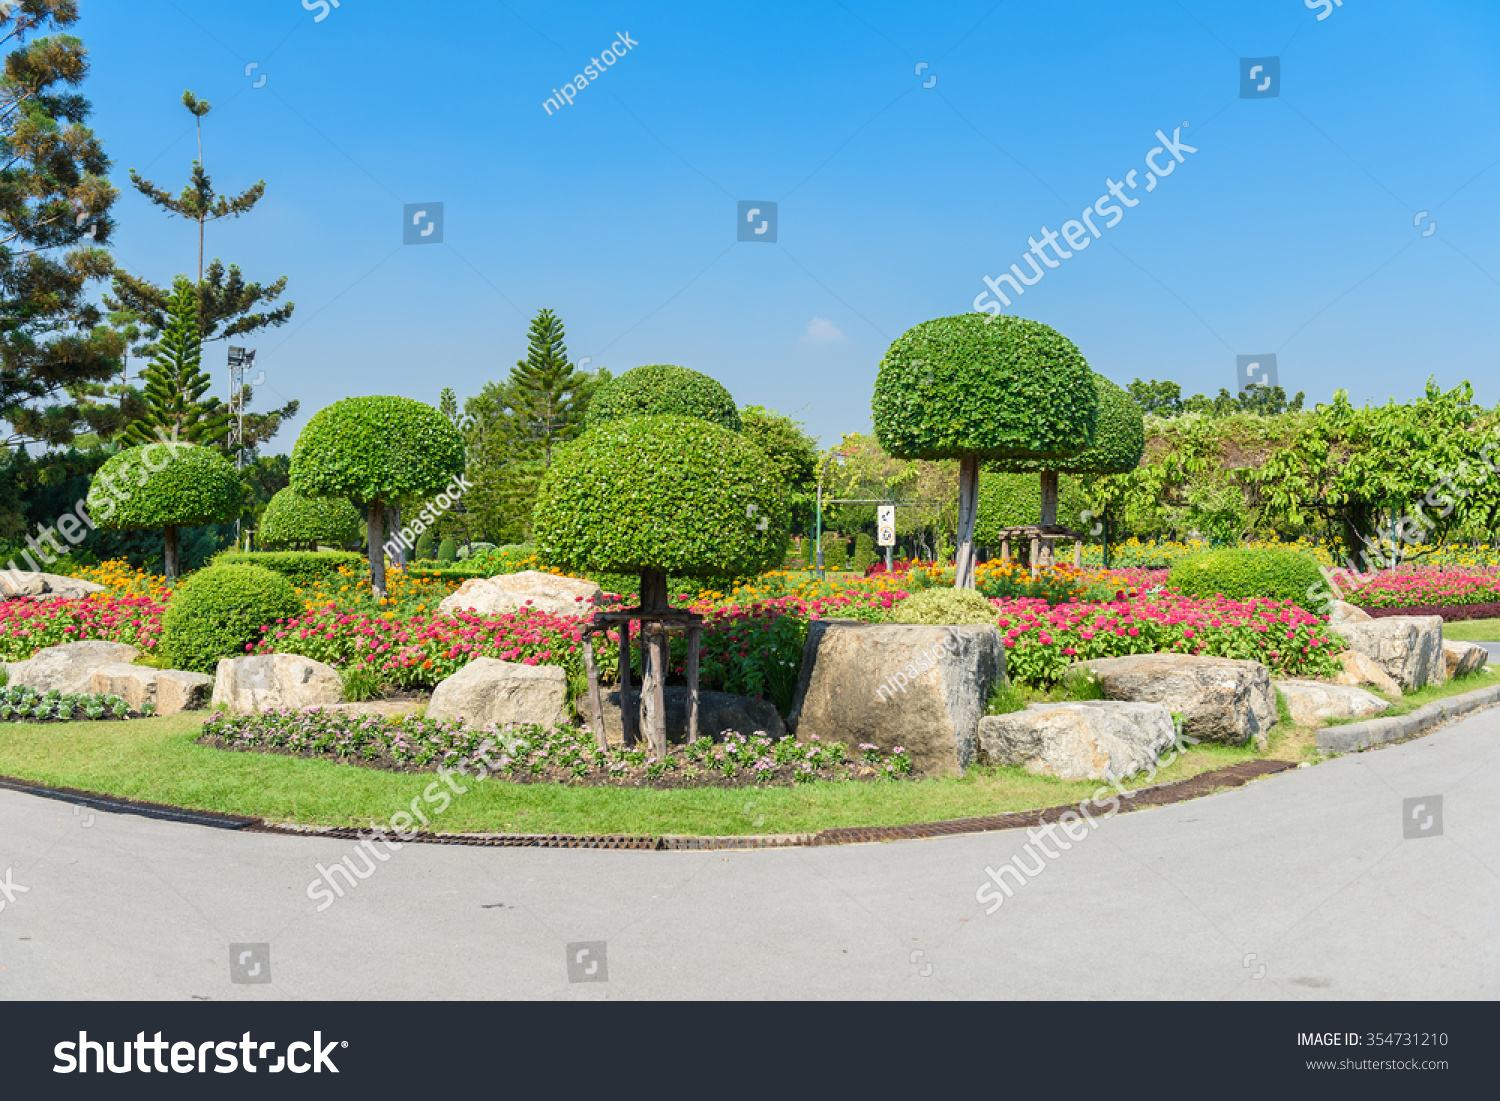 Gardening and Landscaping With Decorative Trees and Plants #354731210